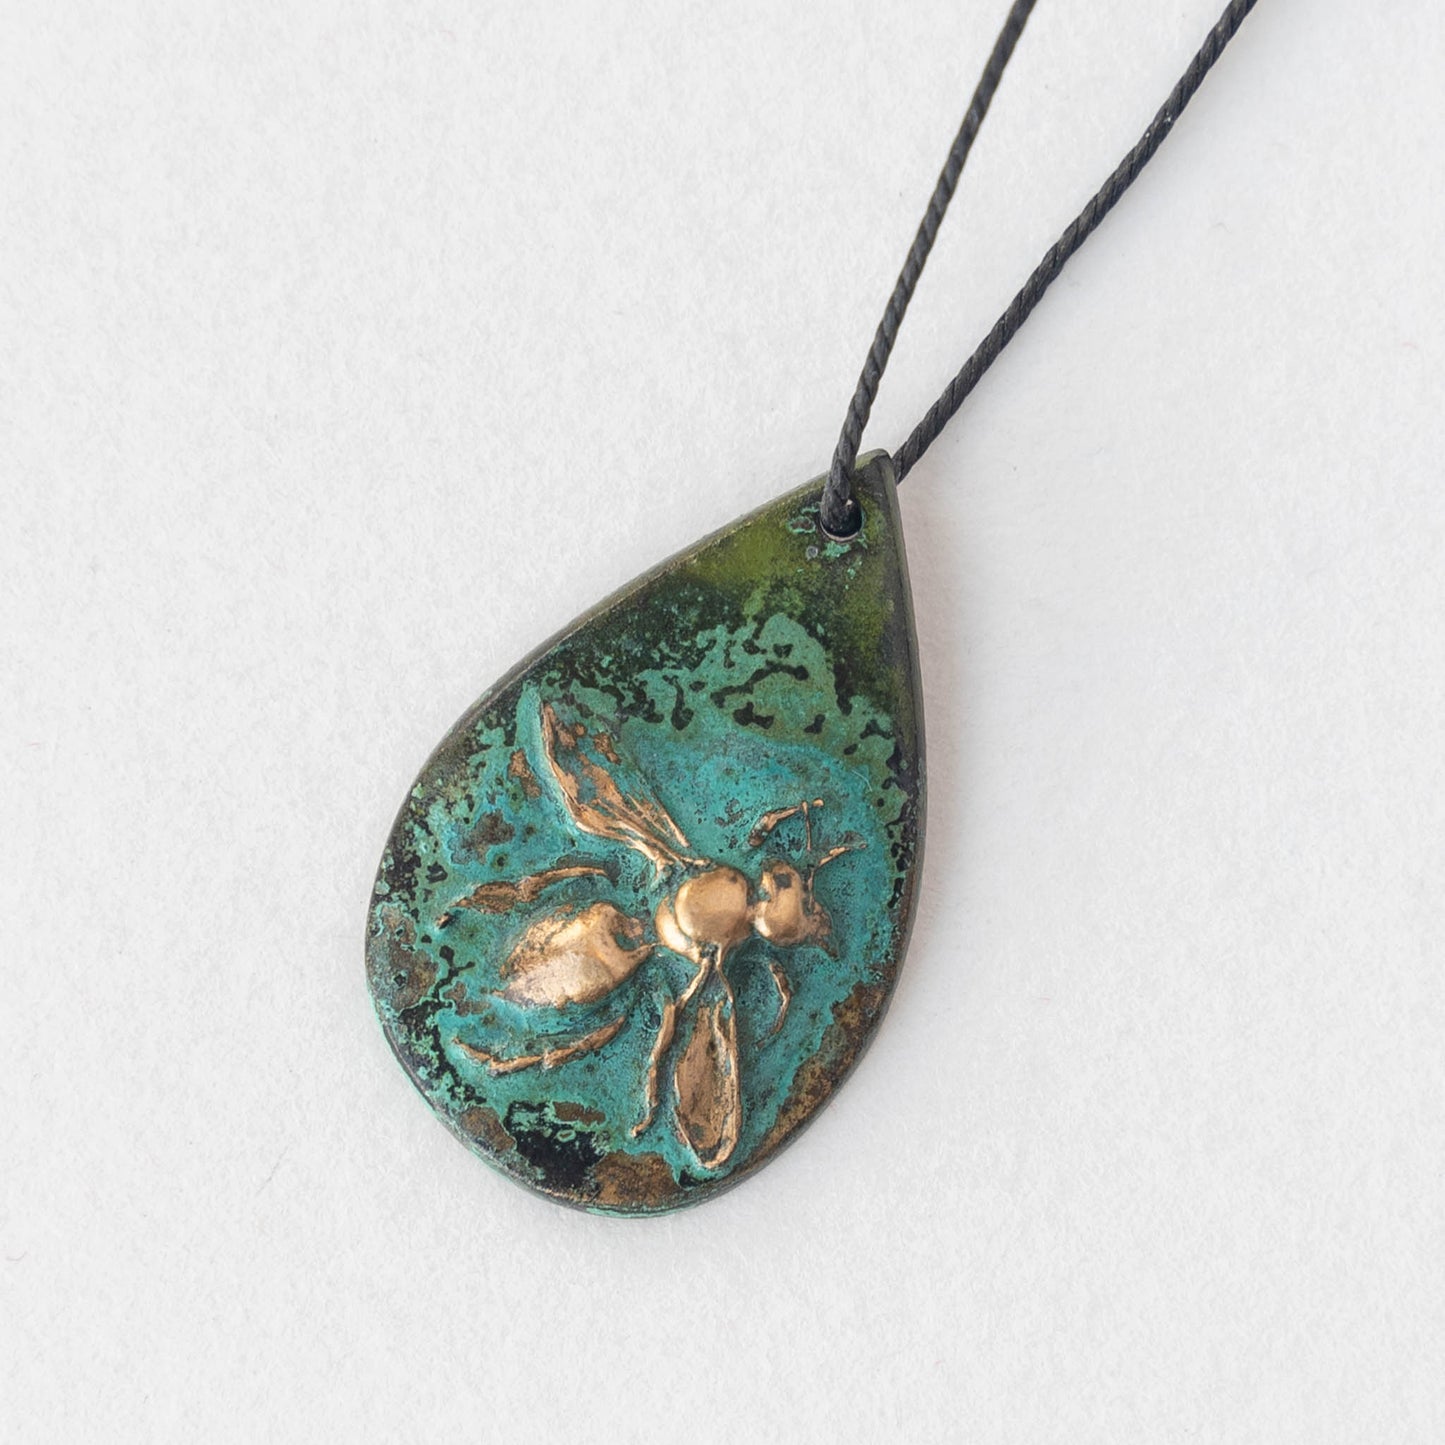 Load image into Gallery viewer, Bronze Honey BeeTeardrop Pendant with a Verde Gris Patina
